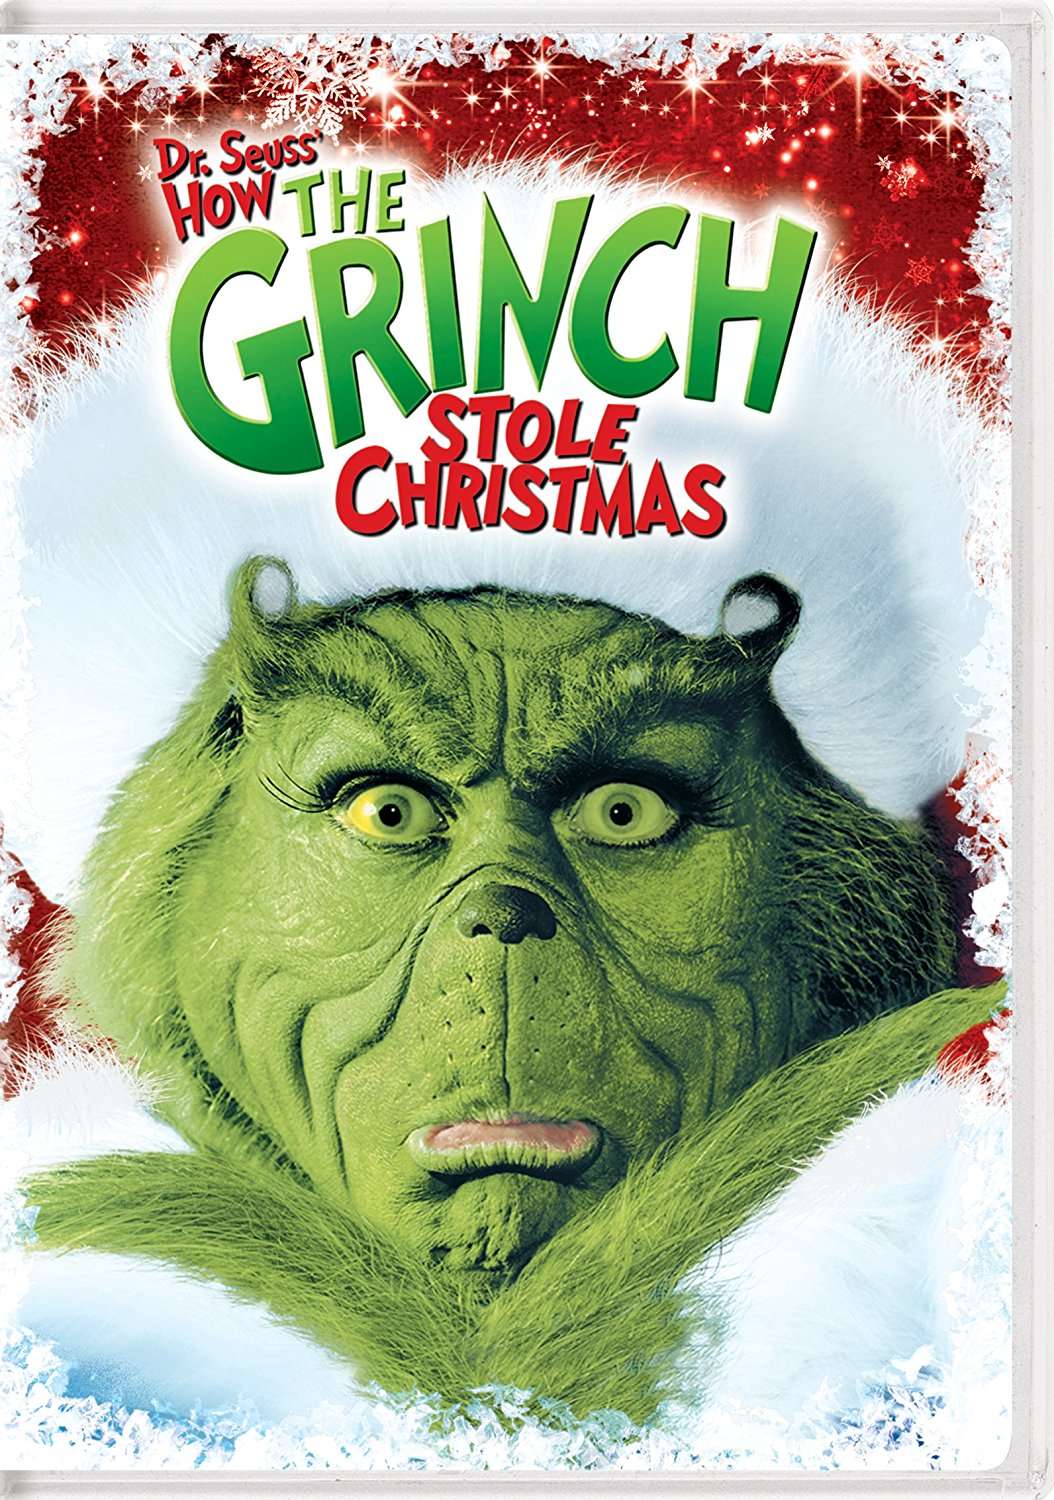 how the grinch stole christmas by dr seuss